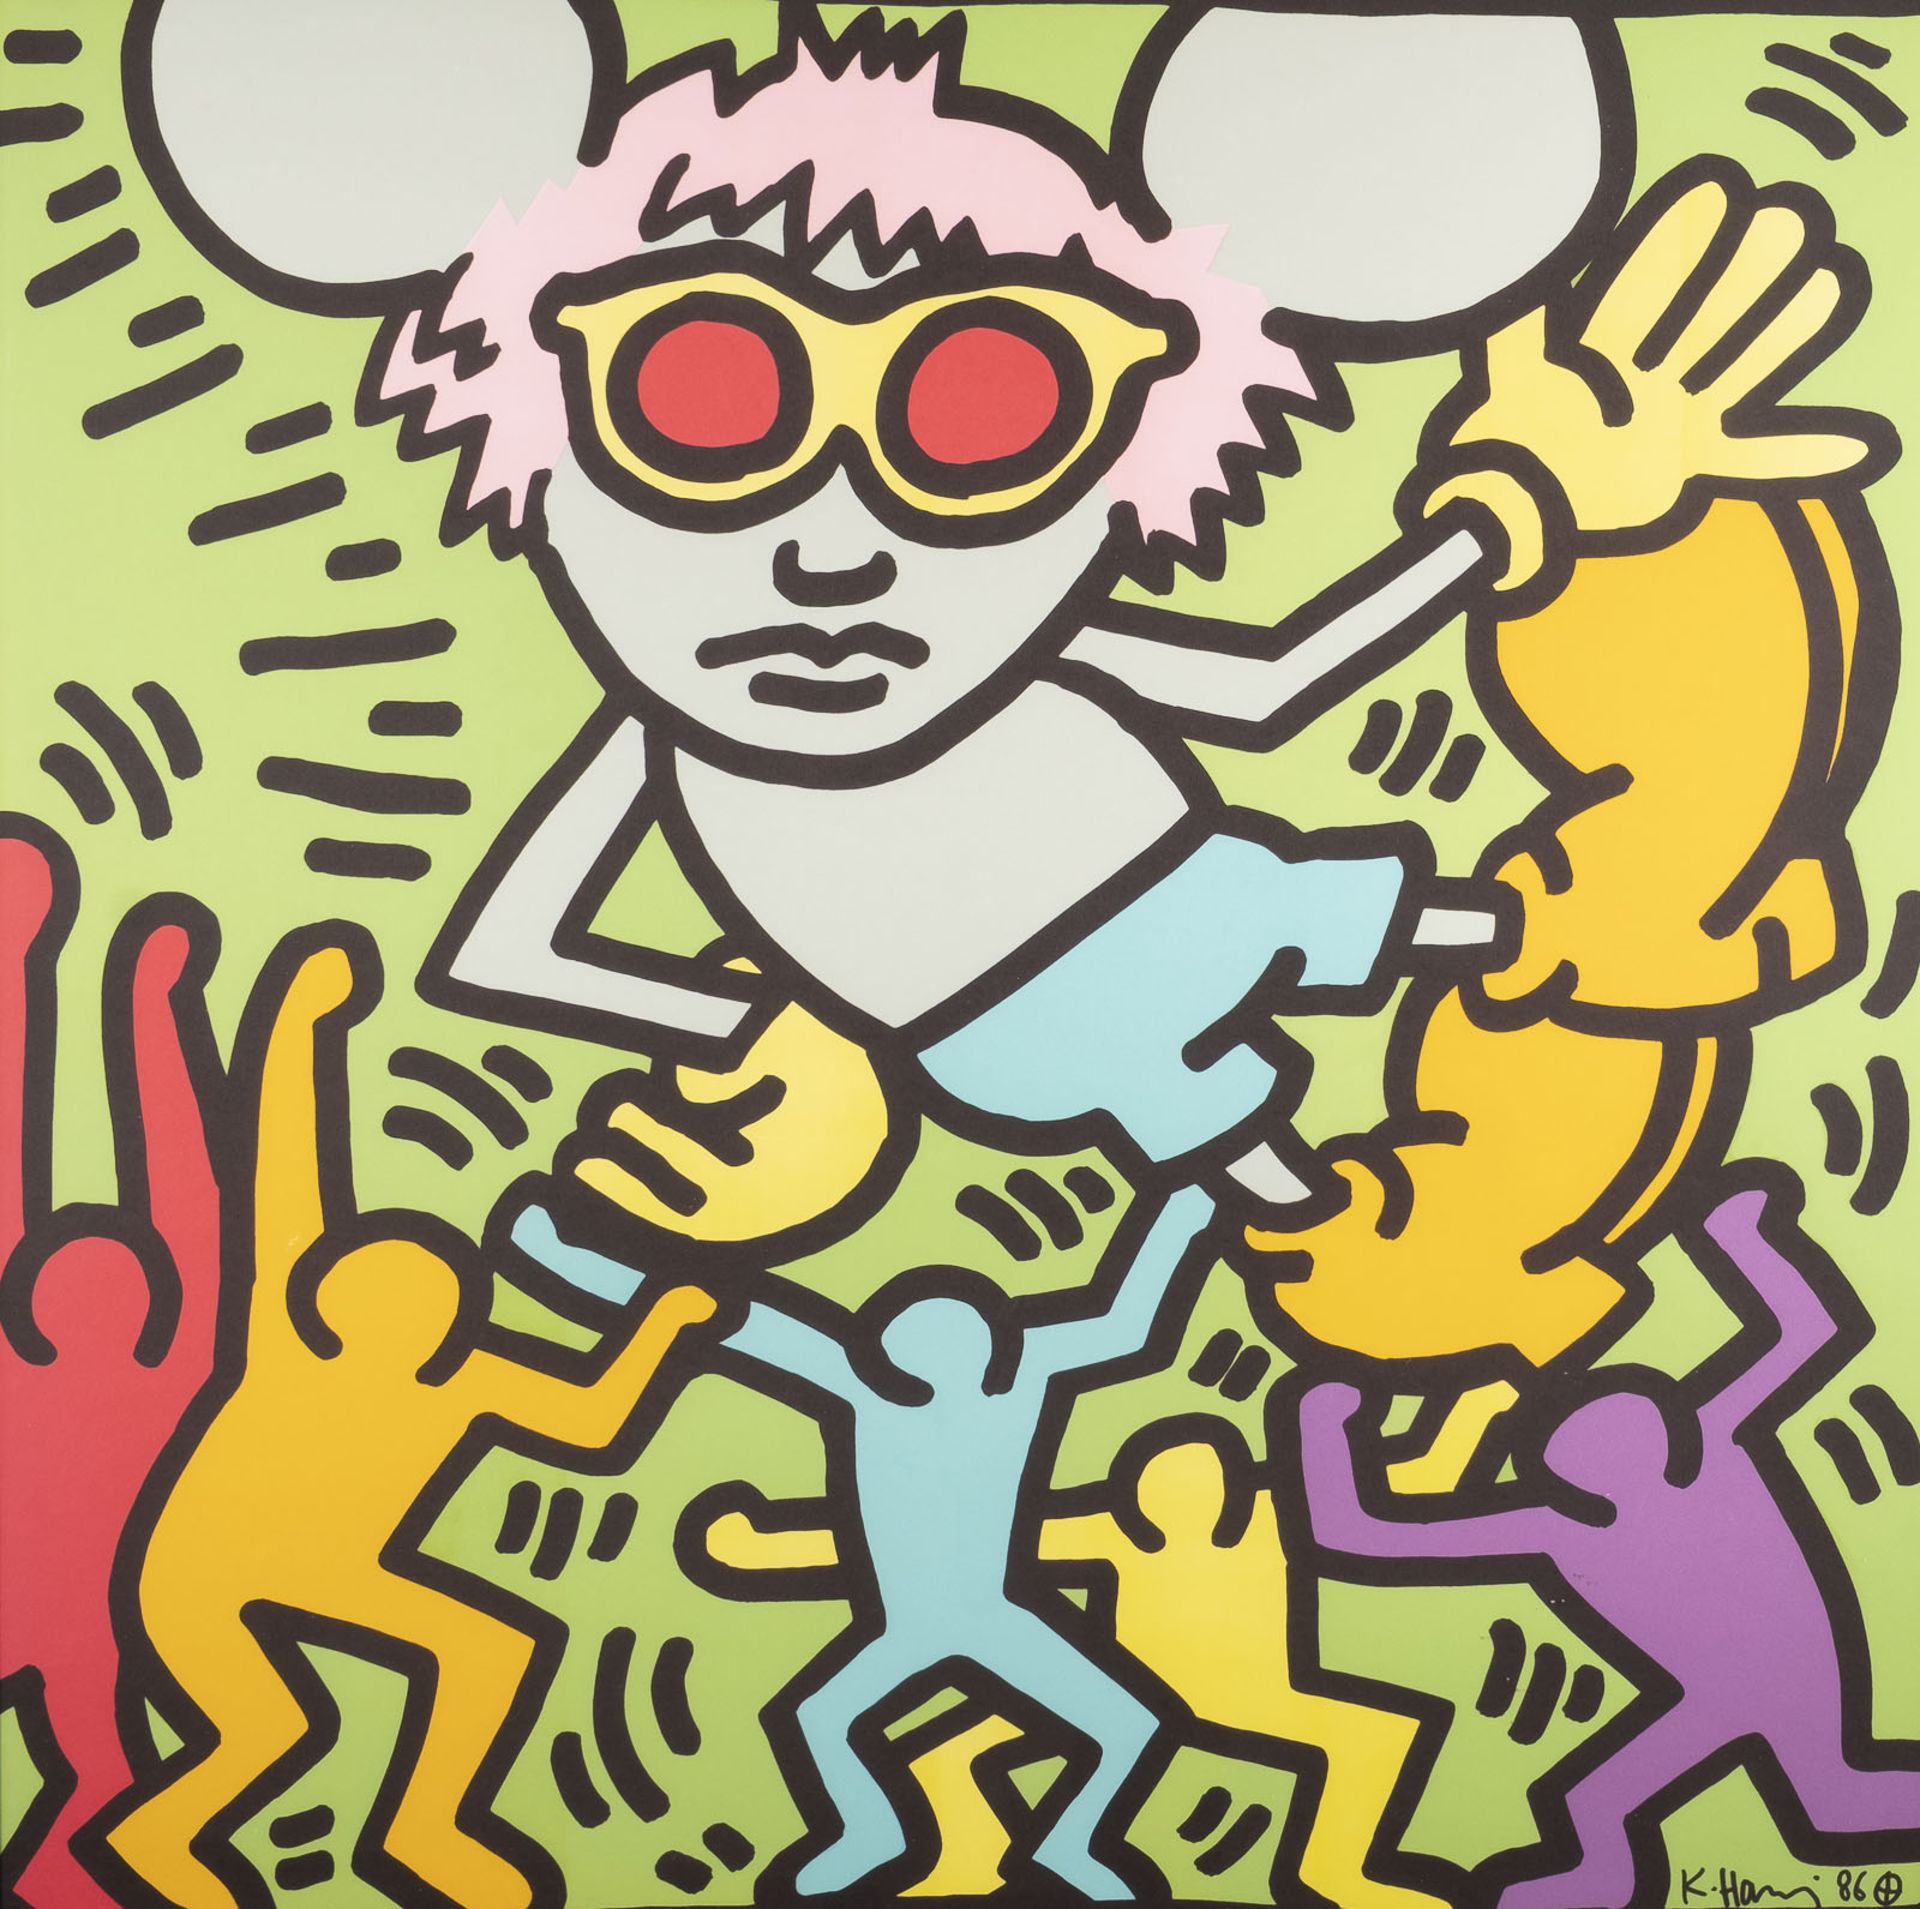 KEITH HARING (NACH) ANDY MOUSE (1986)